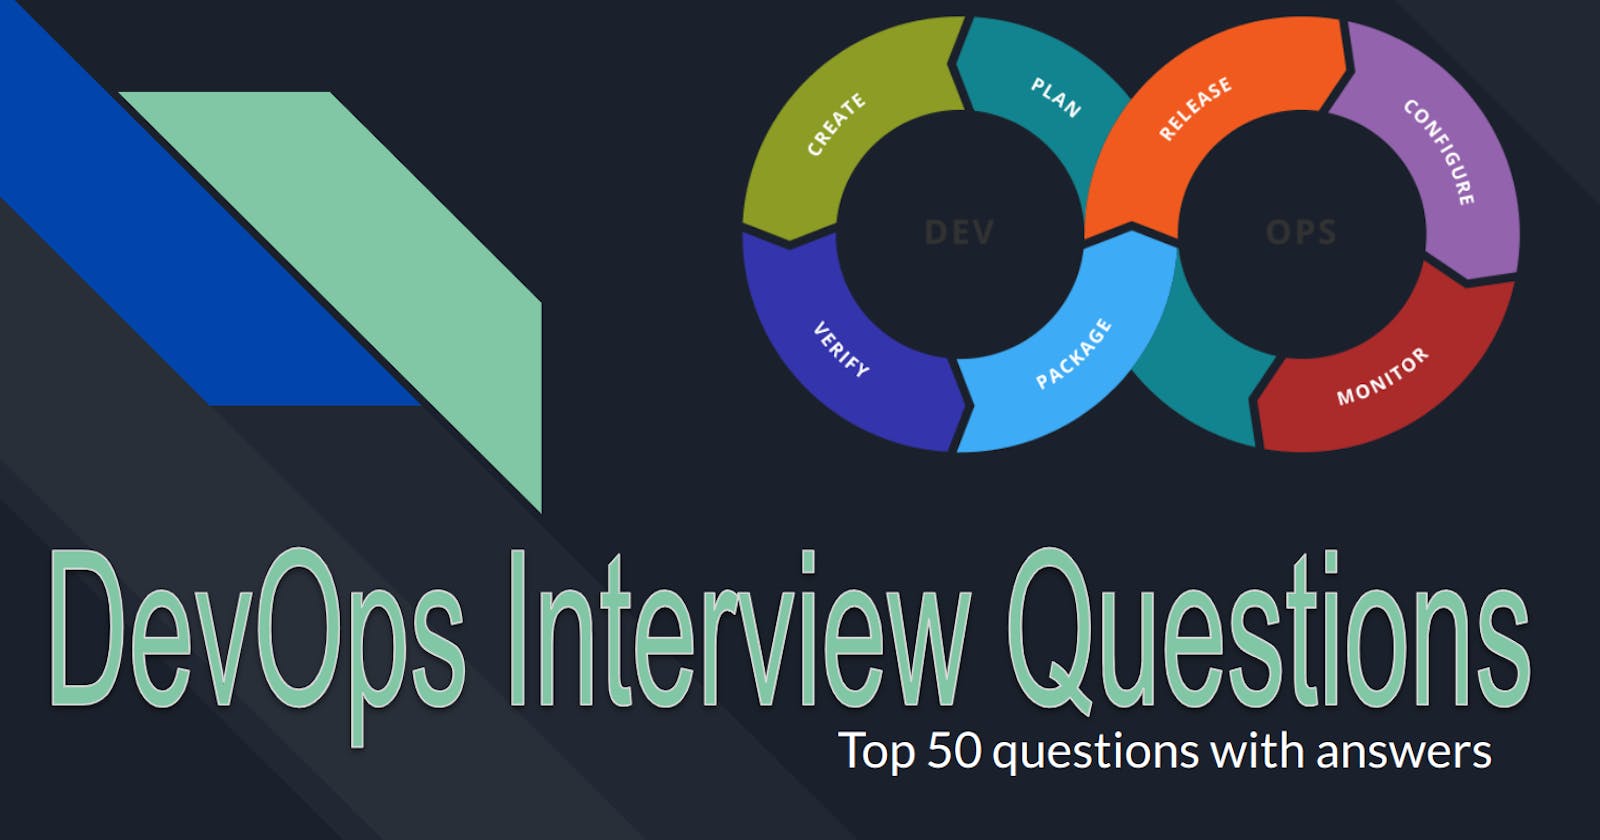 Day 90: DevOps Interview Questions